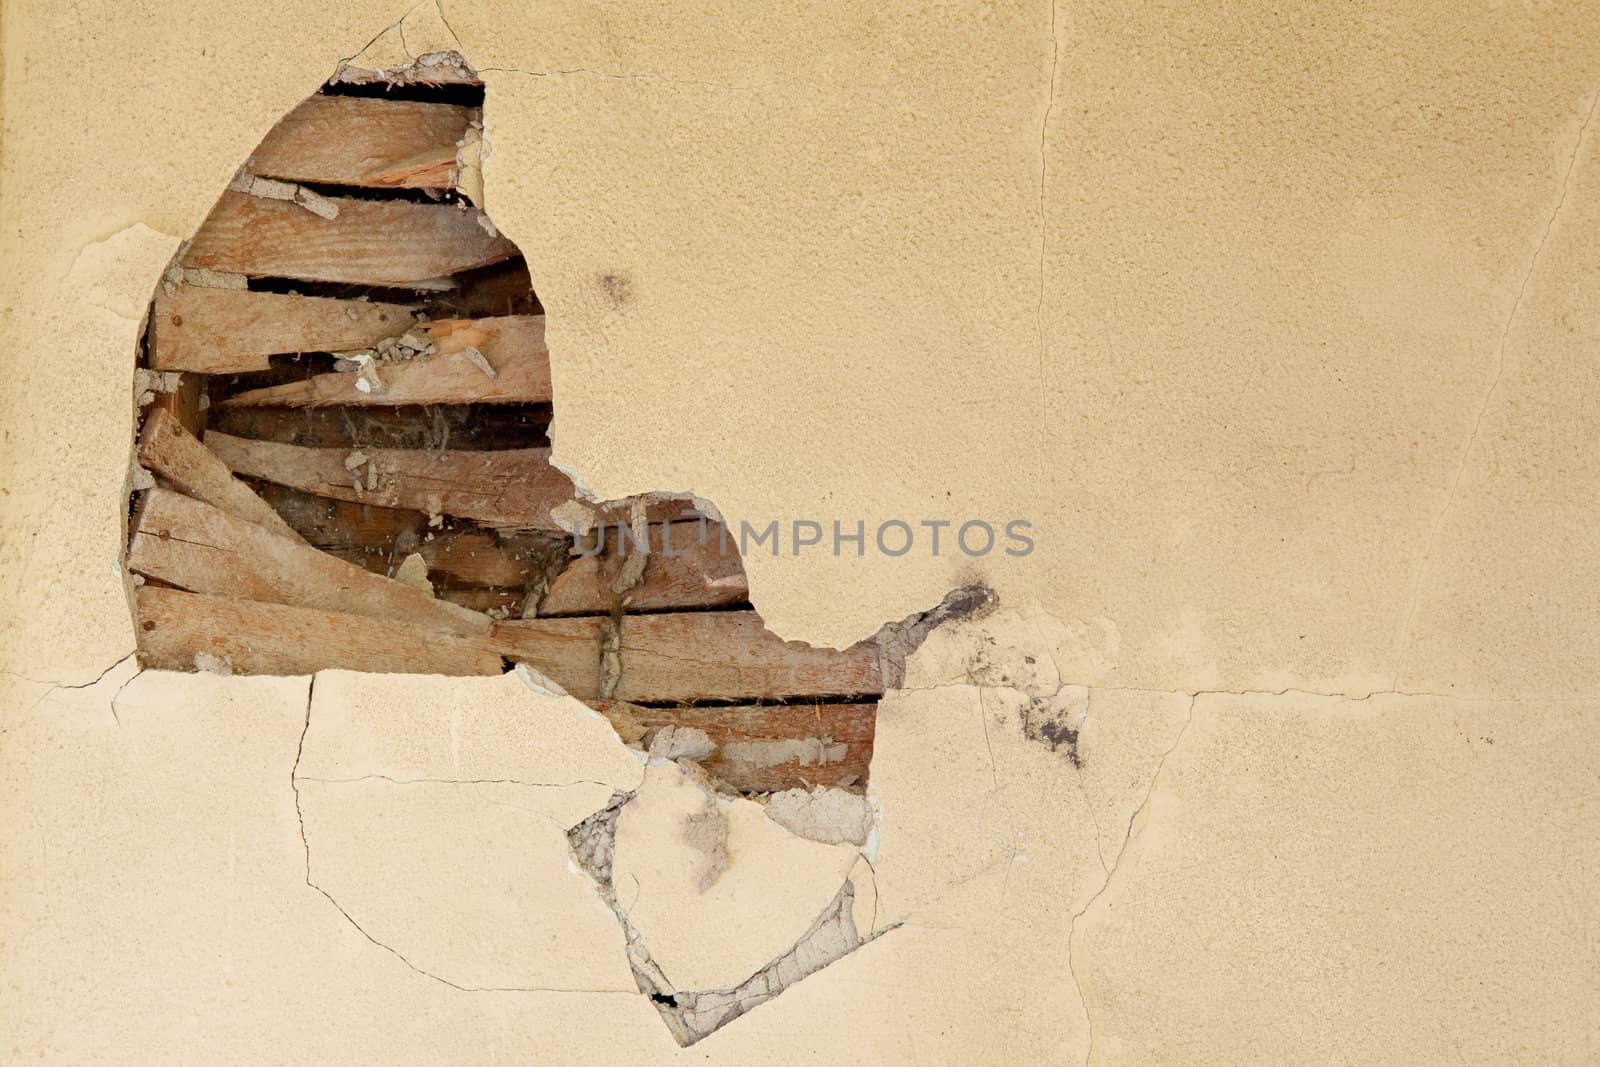 Details of a wall in very bad shape including discoloration and markings, great textured background images with copy space.